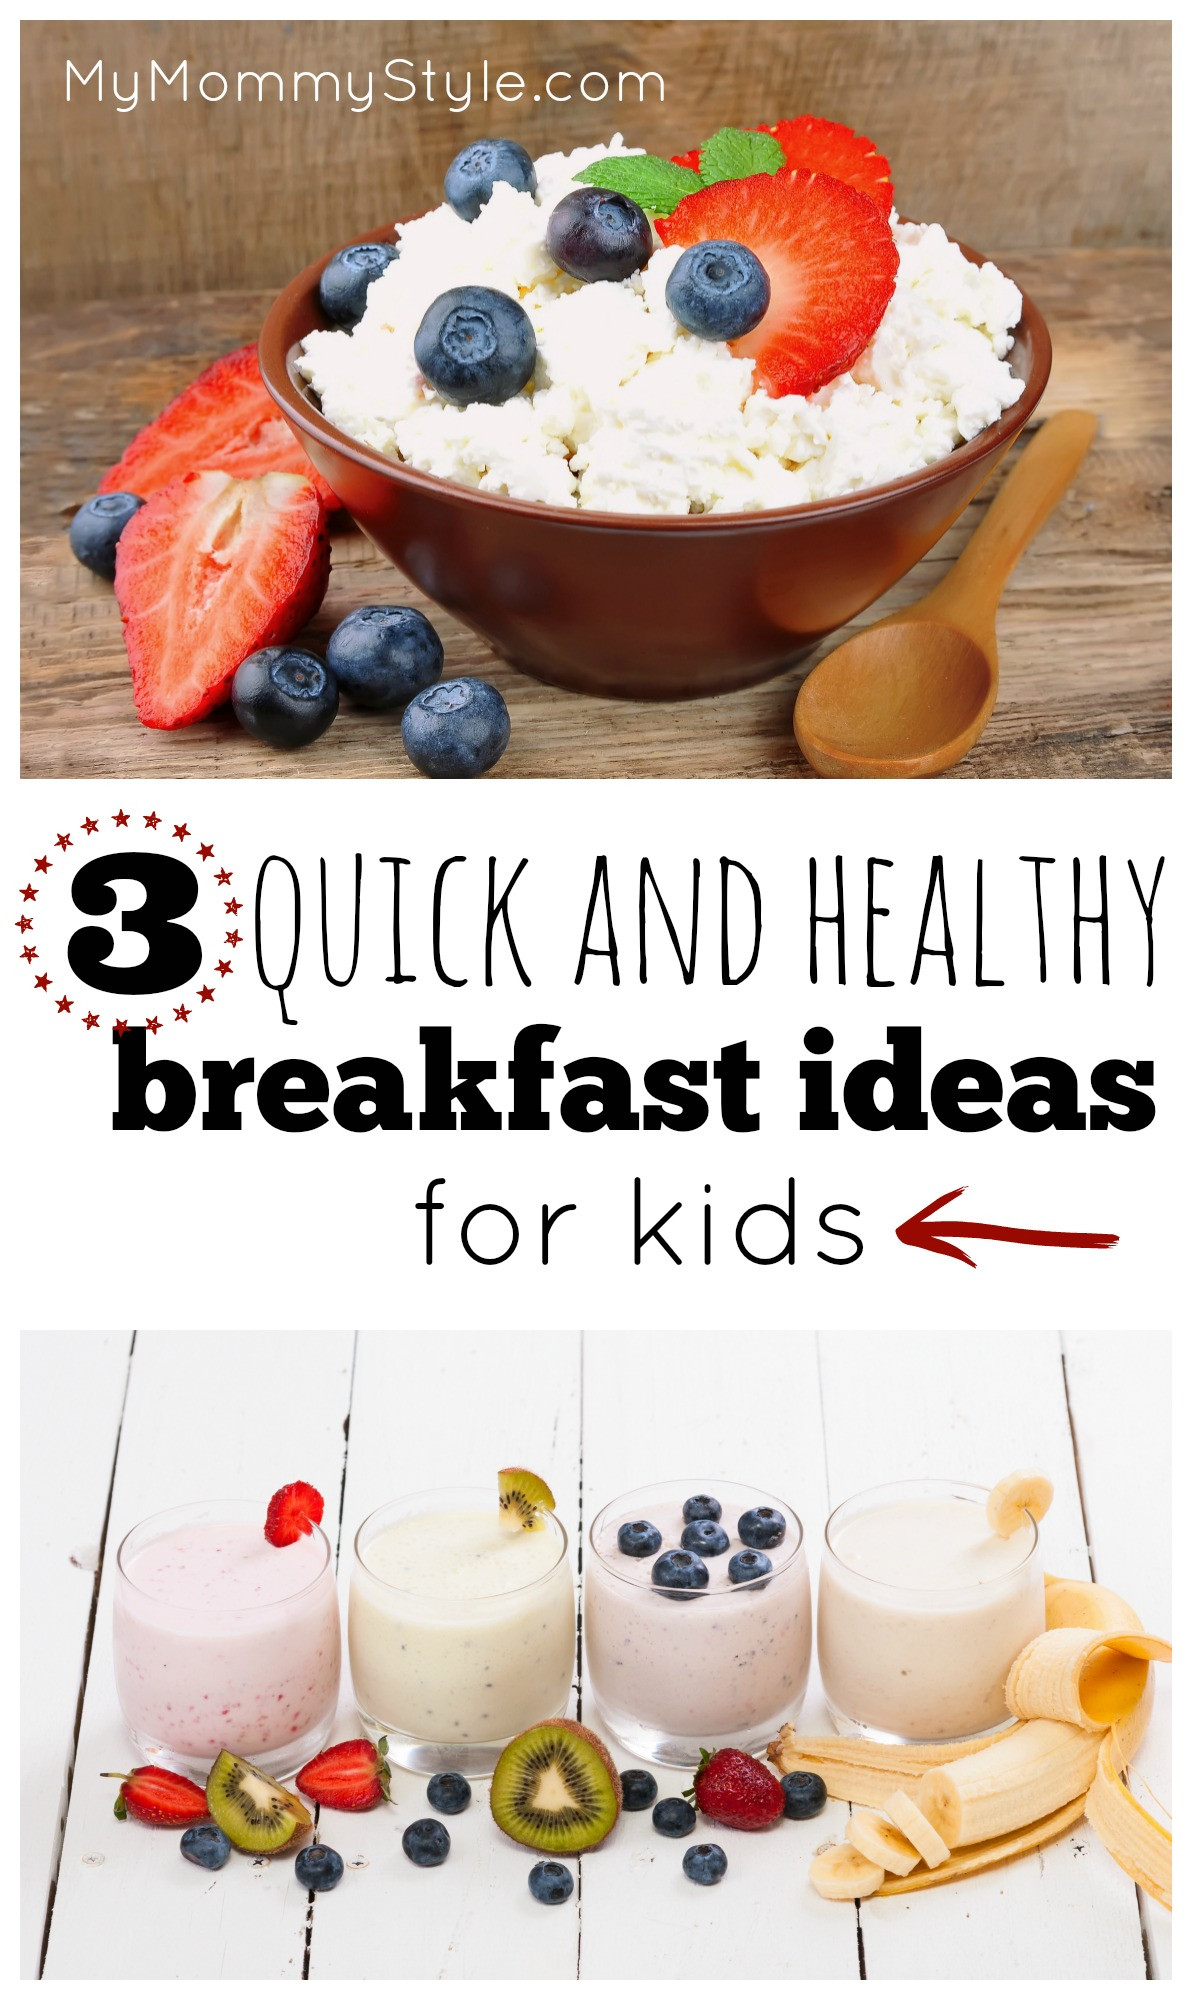 Simple Breakfast Ideas For Kids
 3 Simple and Healthy Breakfast Ideas My Mommy Style